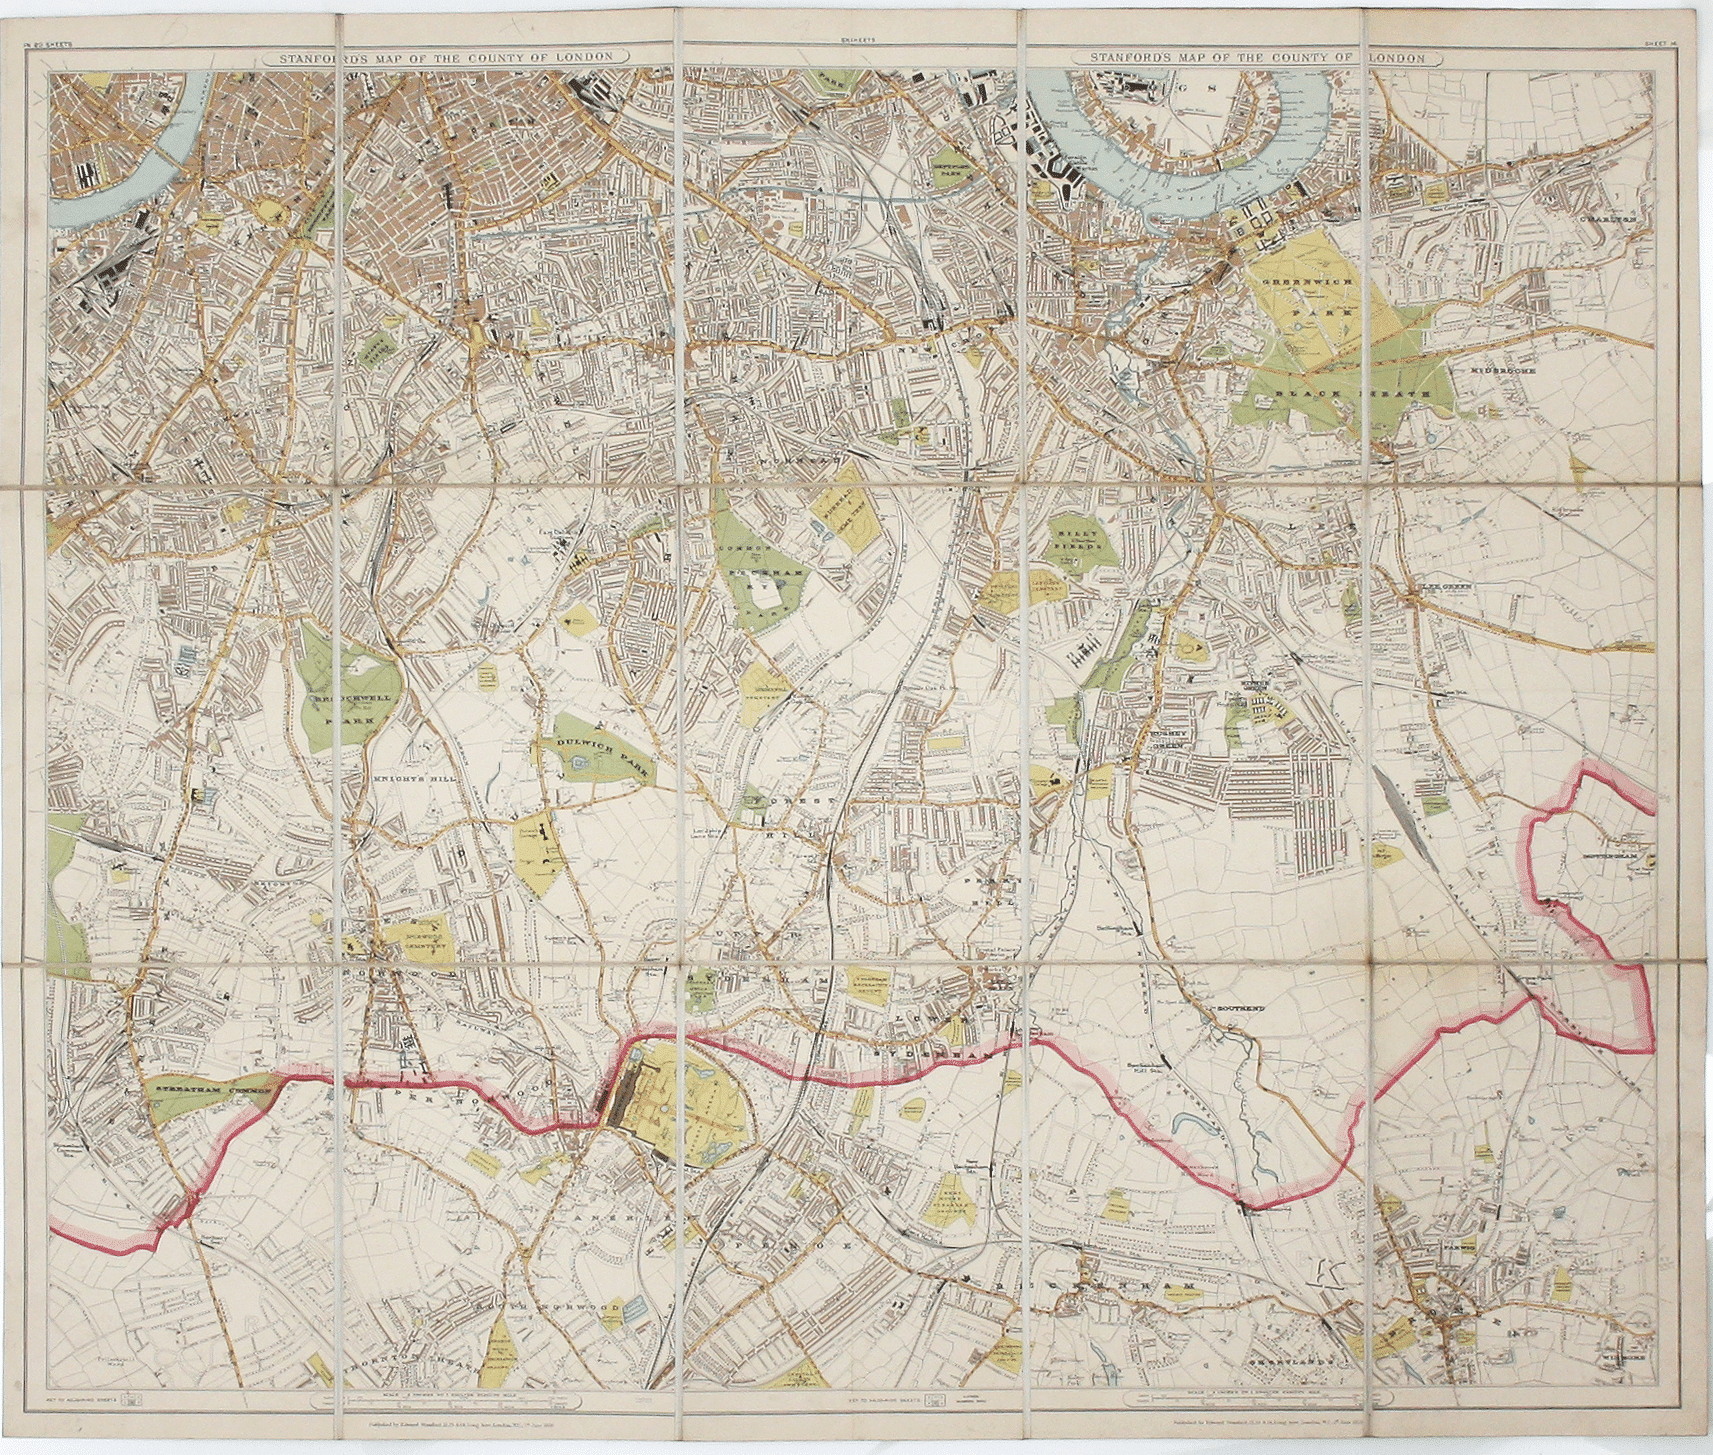 Stanford’s New Map of the County of London